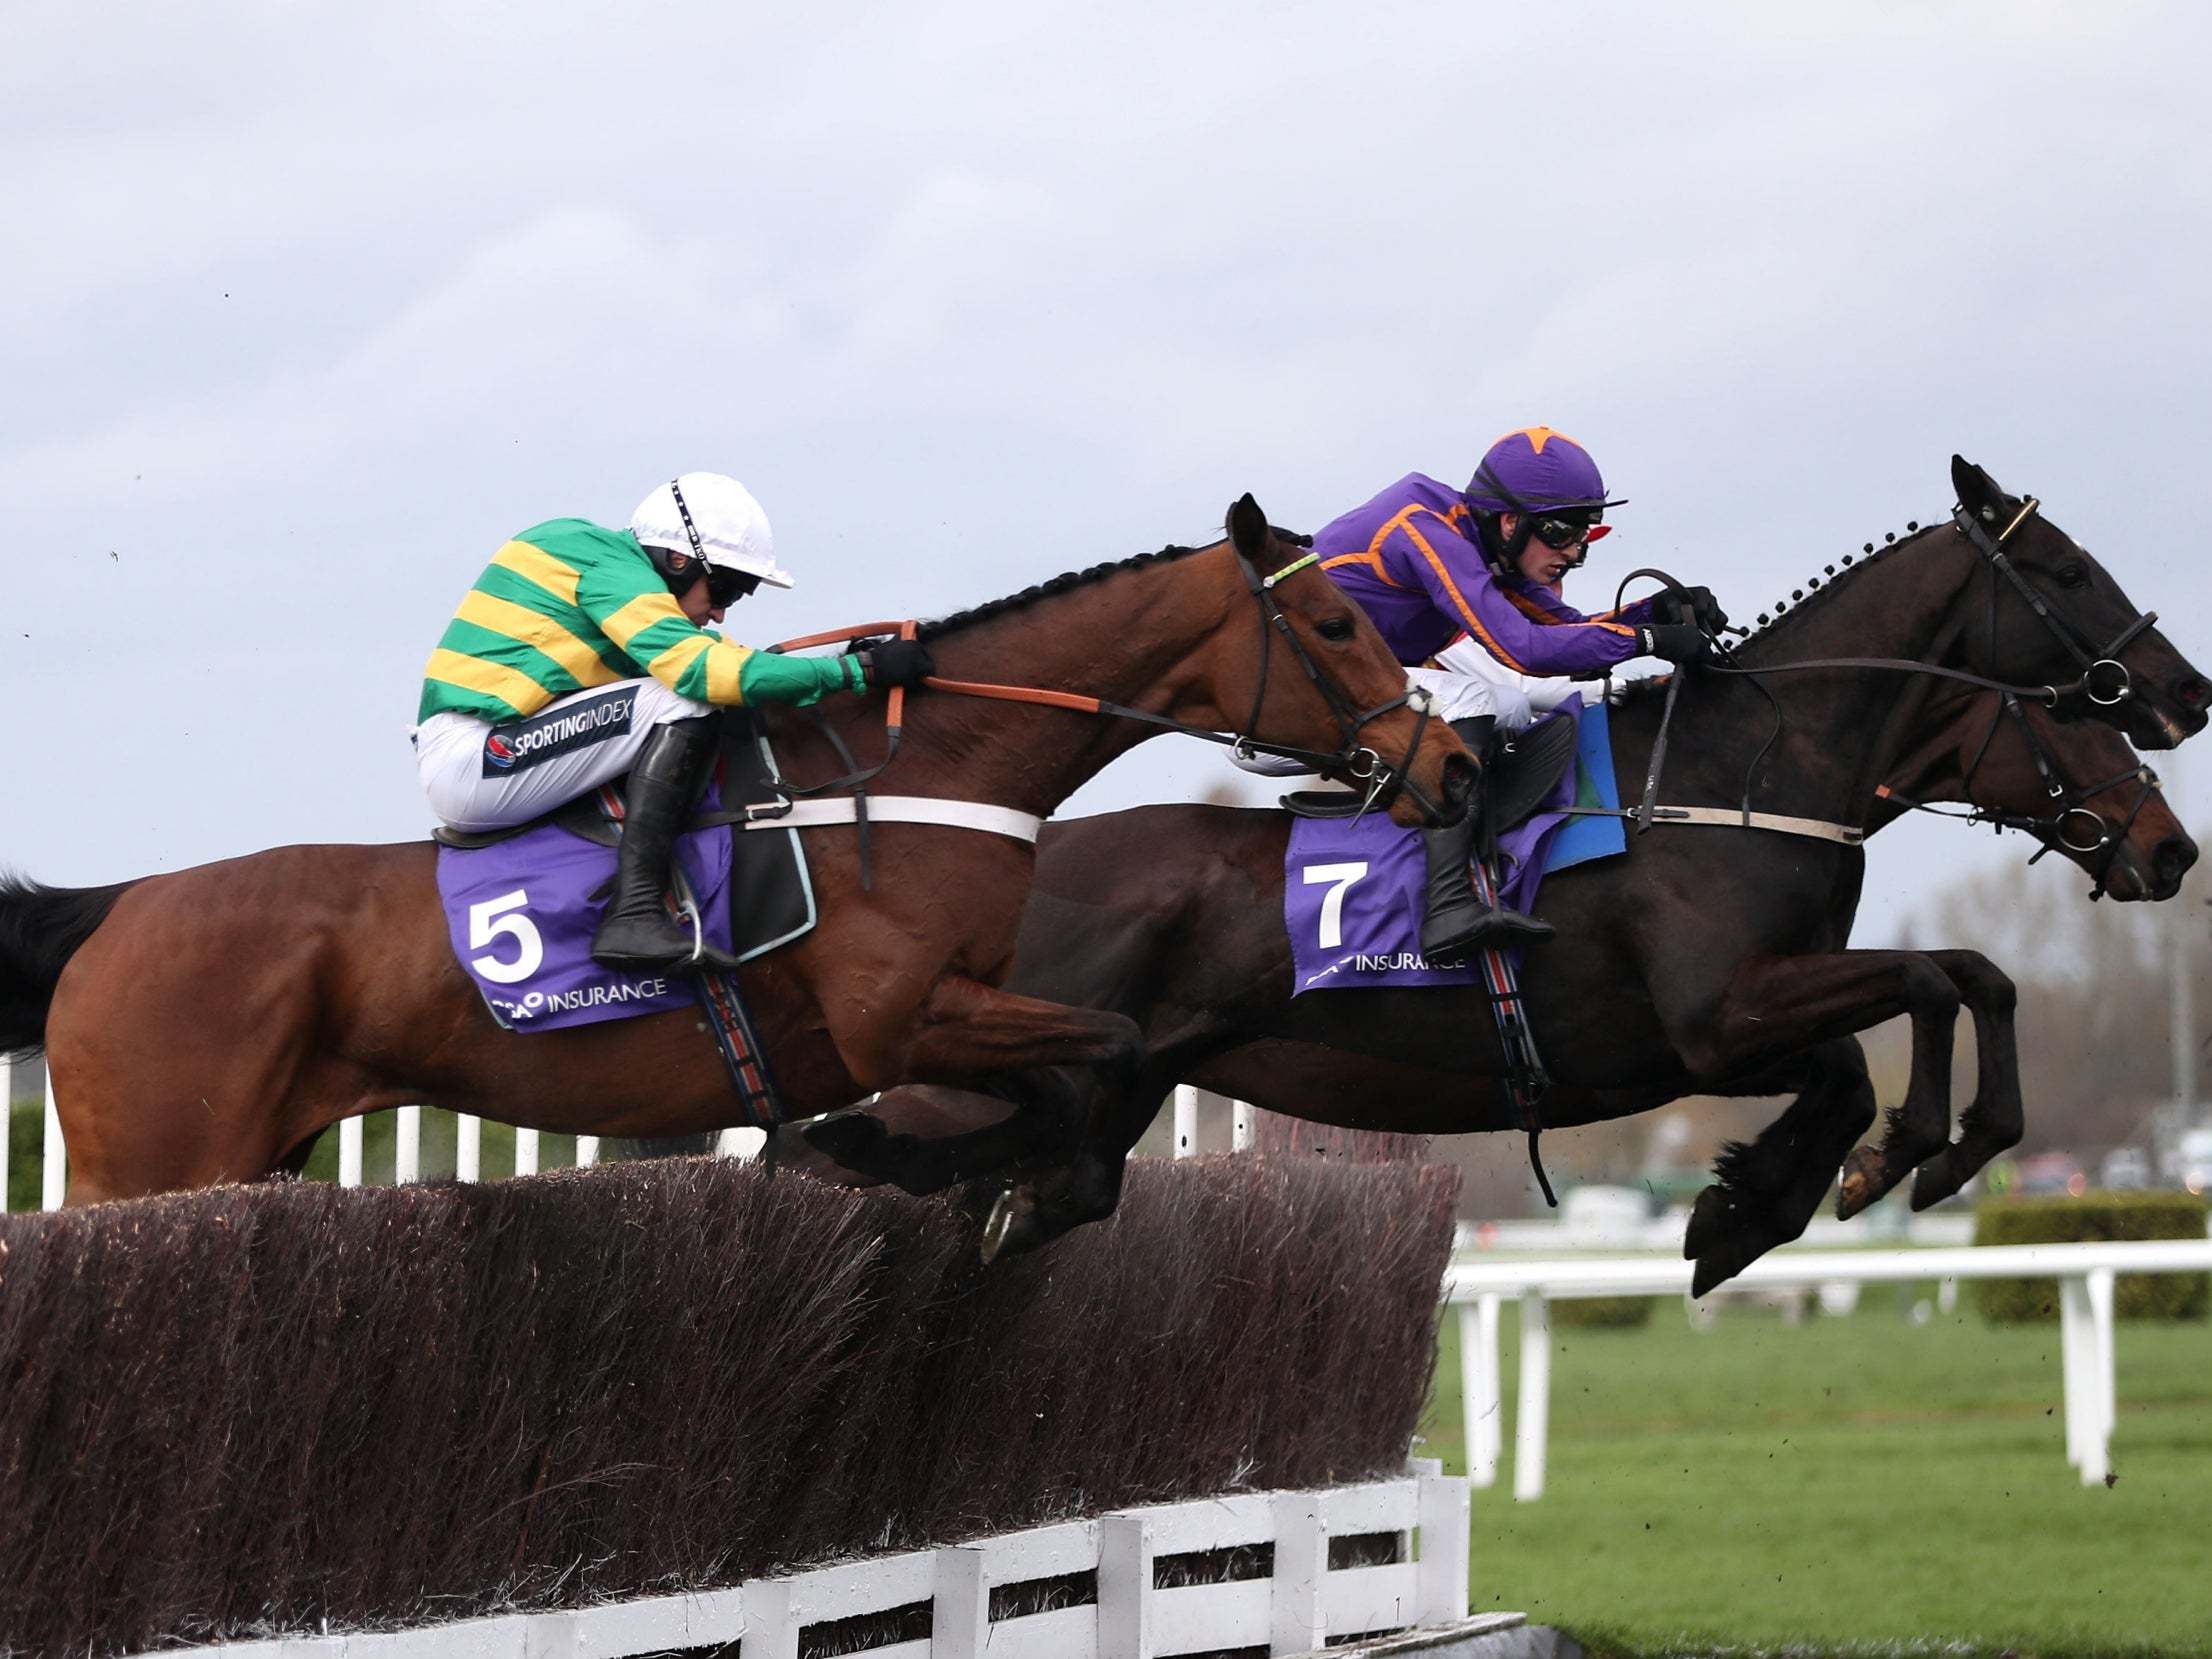 Champ ridden by jockey Barry Geraghty (left) on their way to wining the RSA Chase